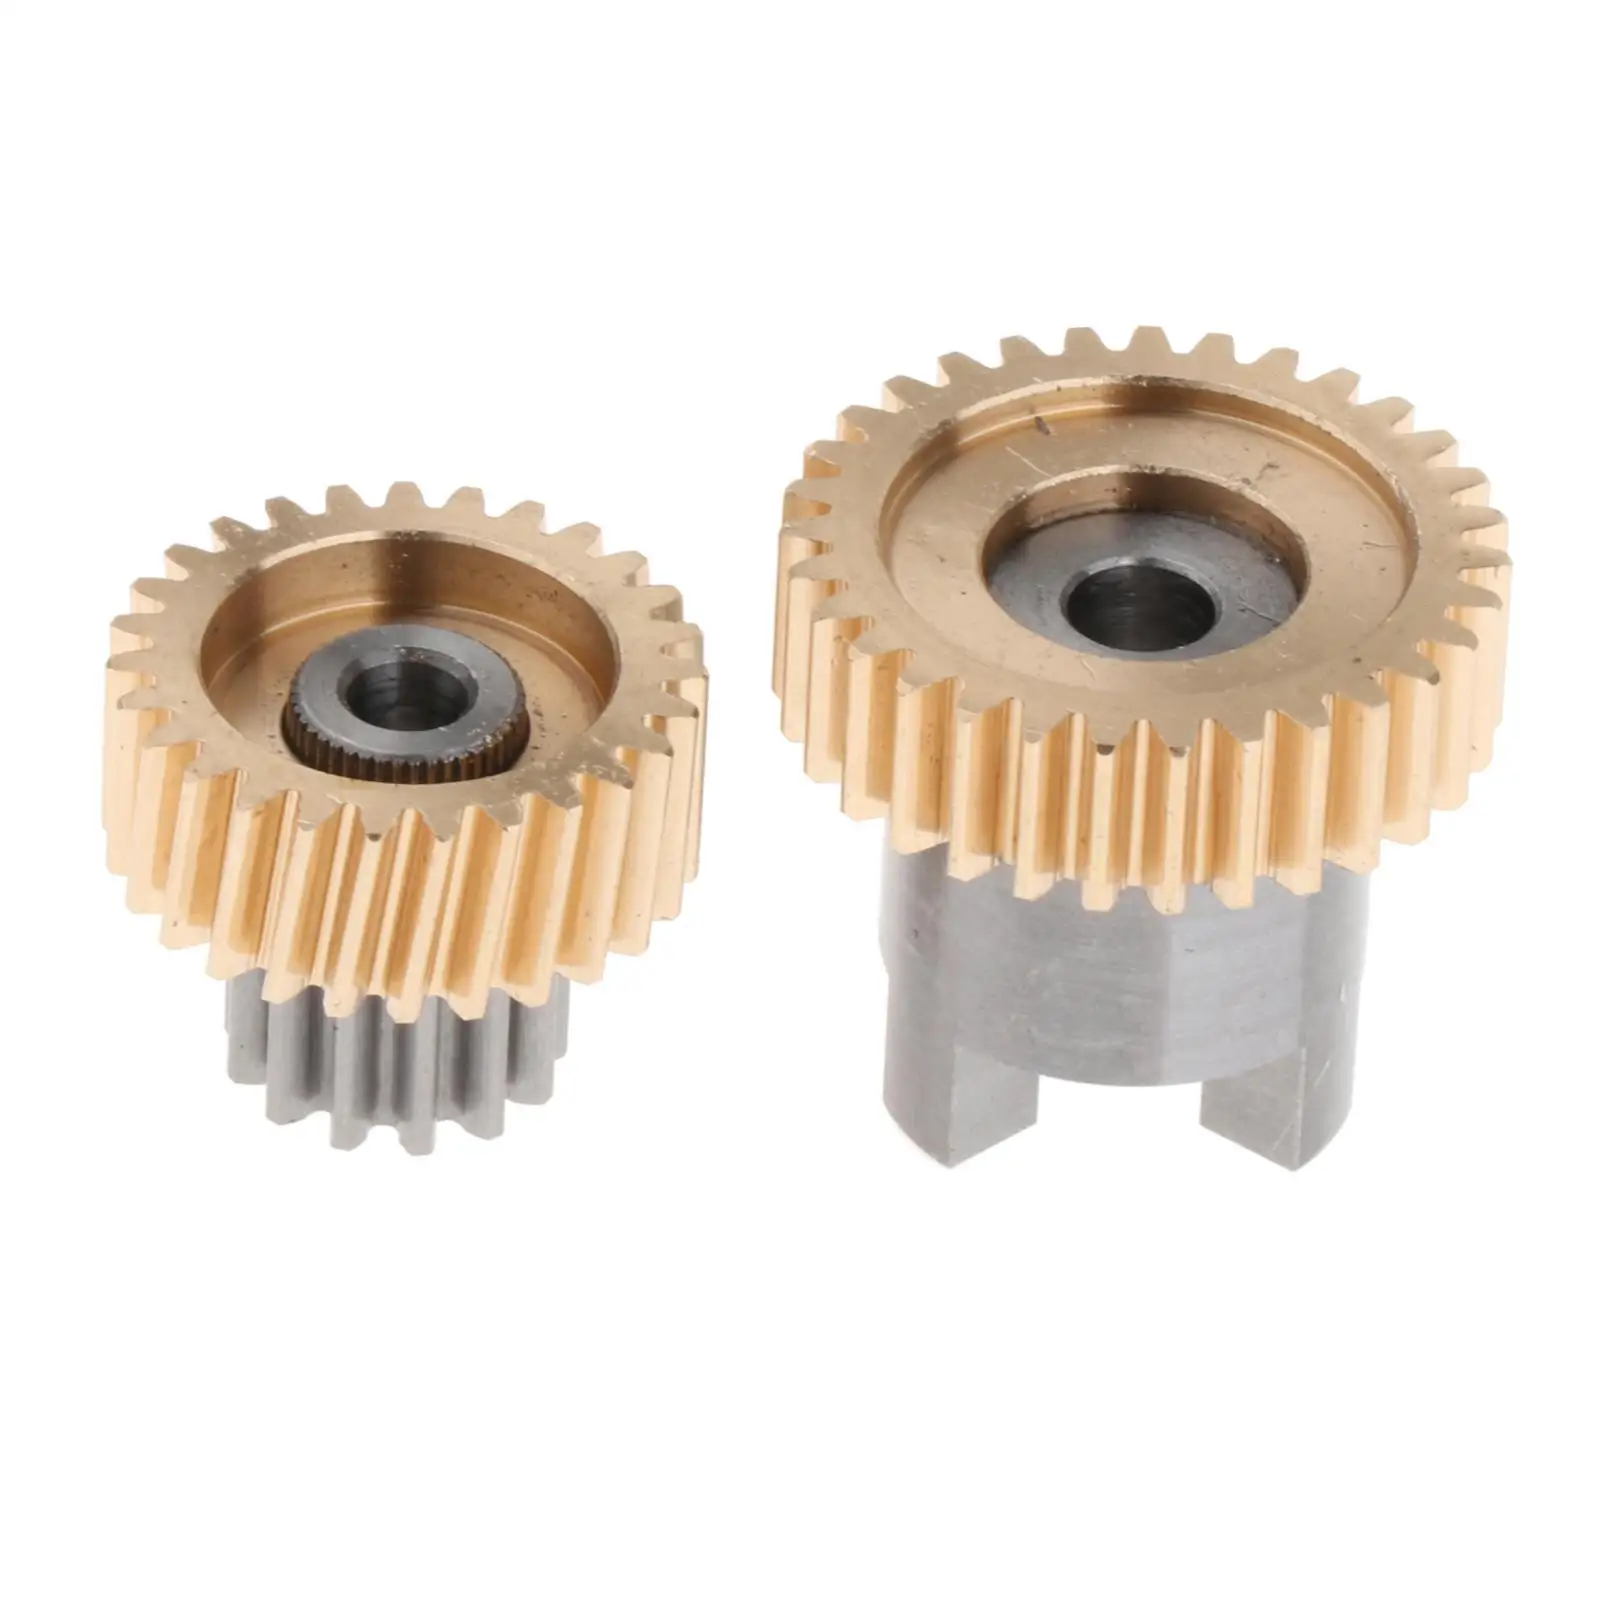 2 Pieces Motor Gear Car Accessories Repair cc11WS134 for Porsche 2011 to 2017 High Performance Easily Install Spare Parts